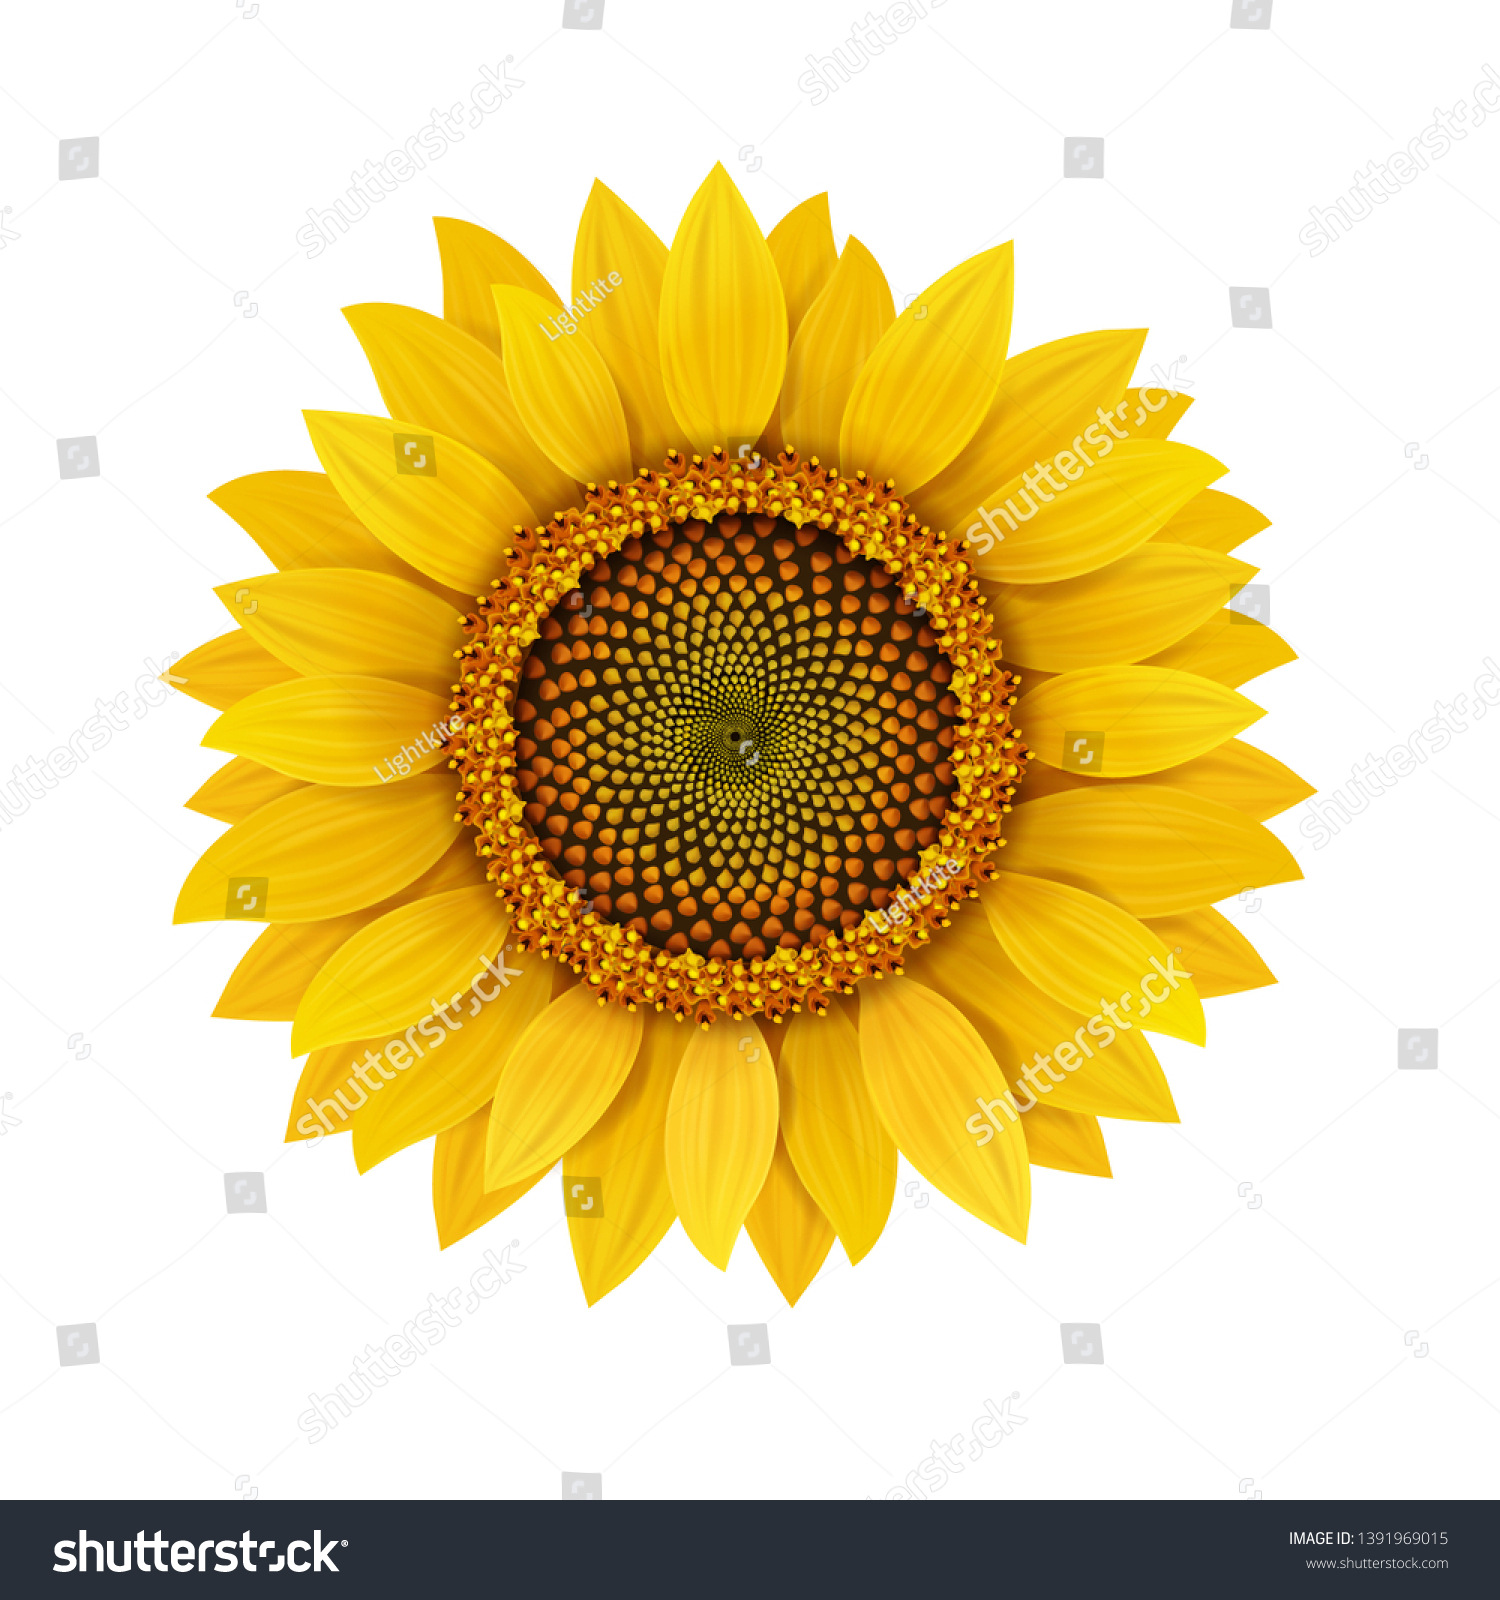 SVG of Sunflower realistic isolated, vector illustration. svg